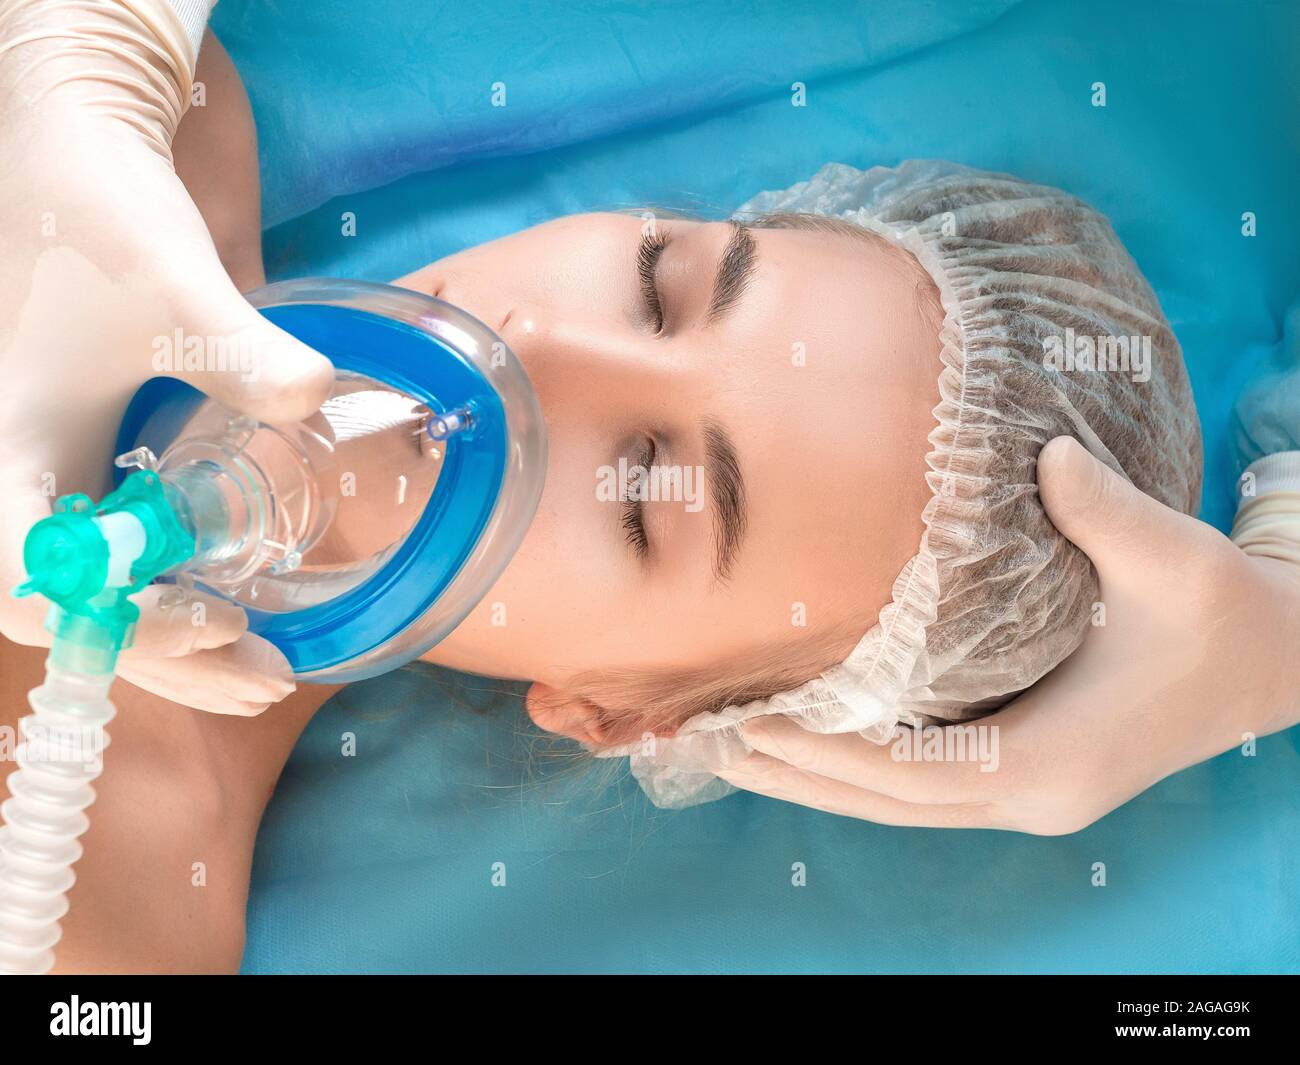 Beautiful patient receives nnaesthetic. Close up face of a patient and hands of a doctor. Stock Photo